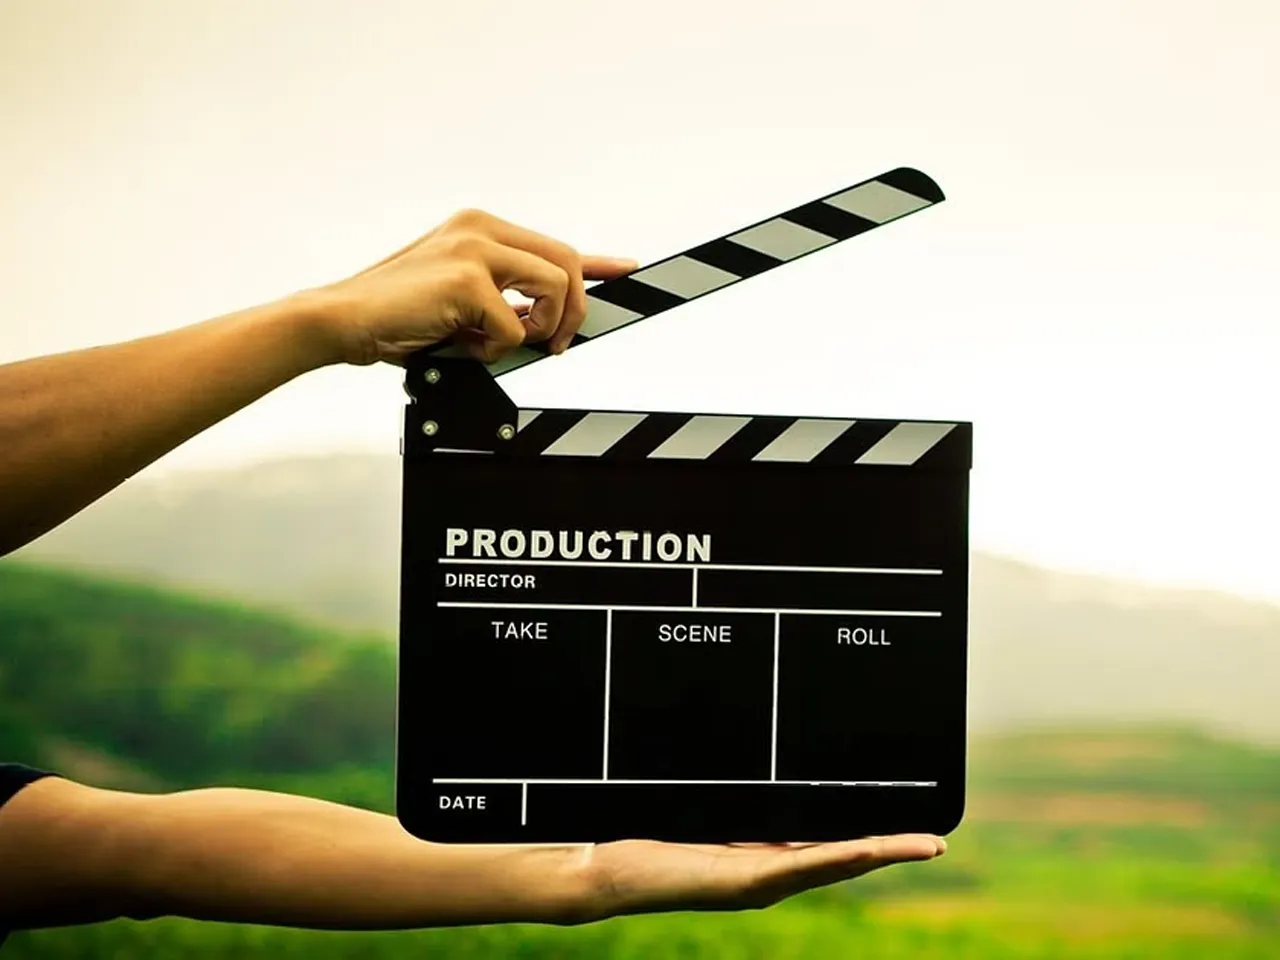 Maharashtra government allows free ad film shoots on government land